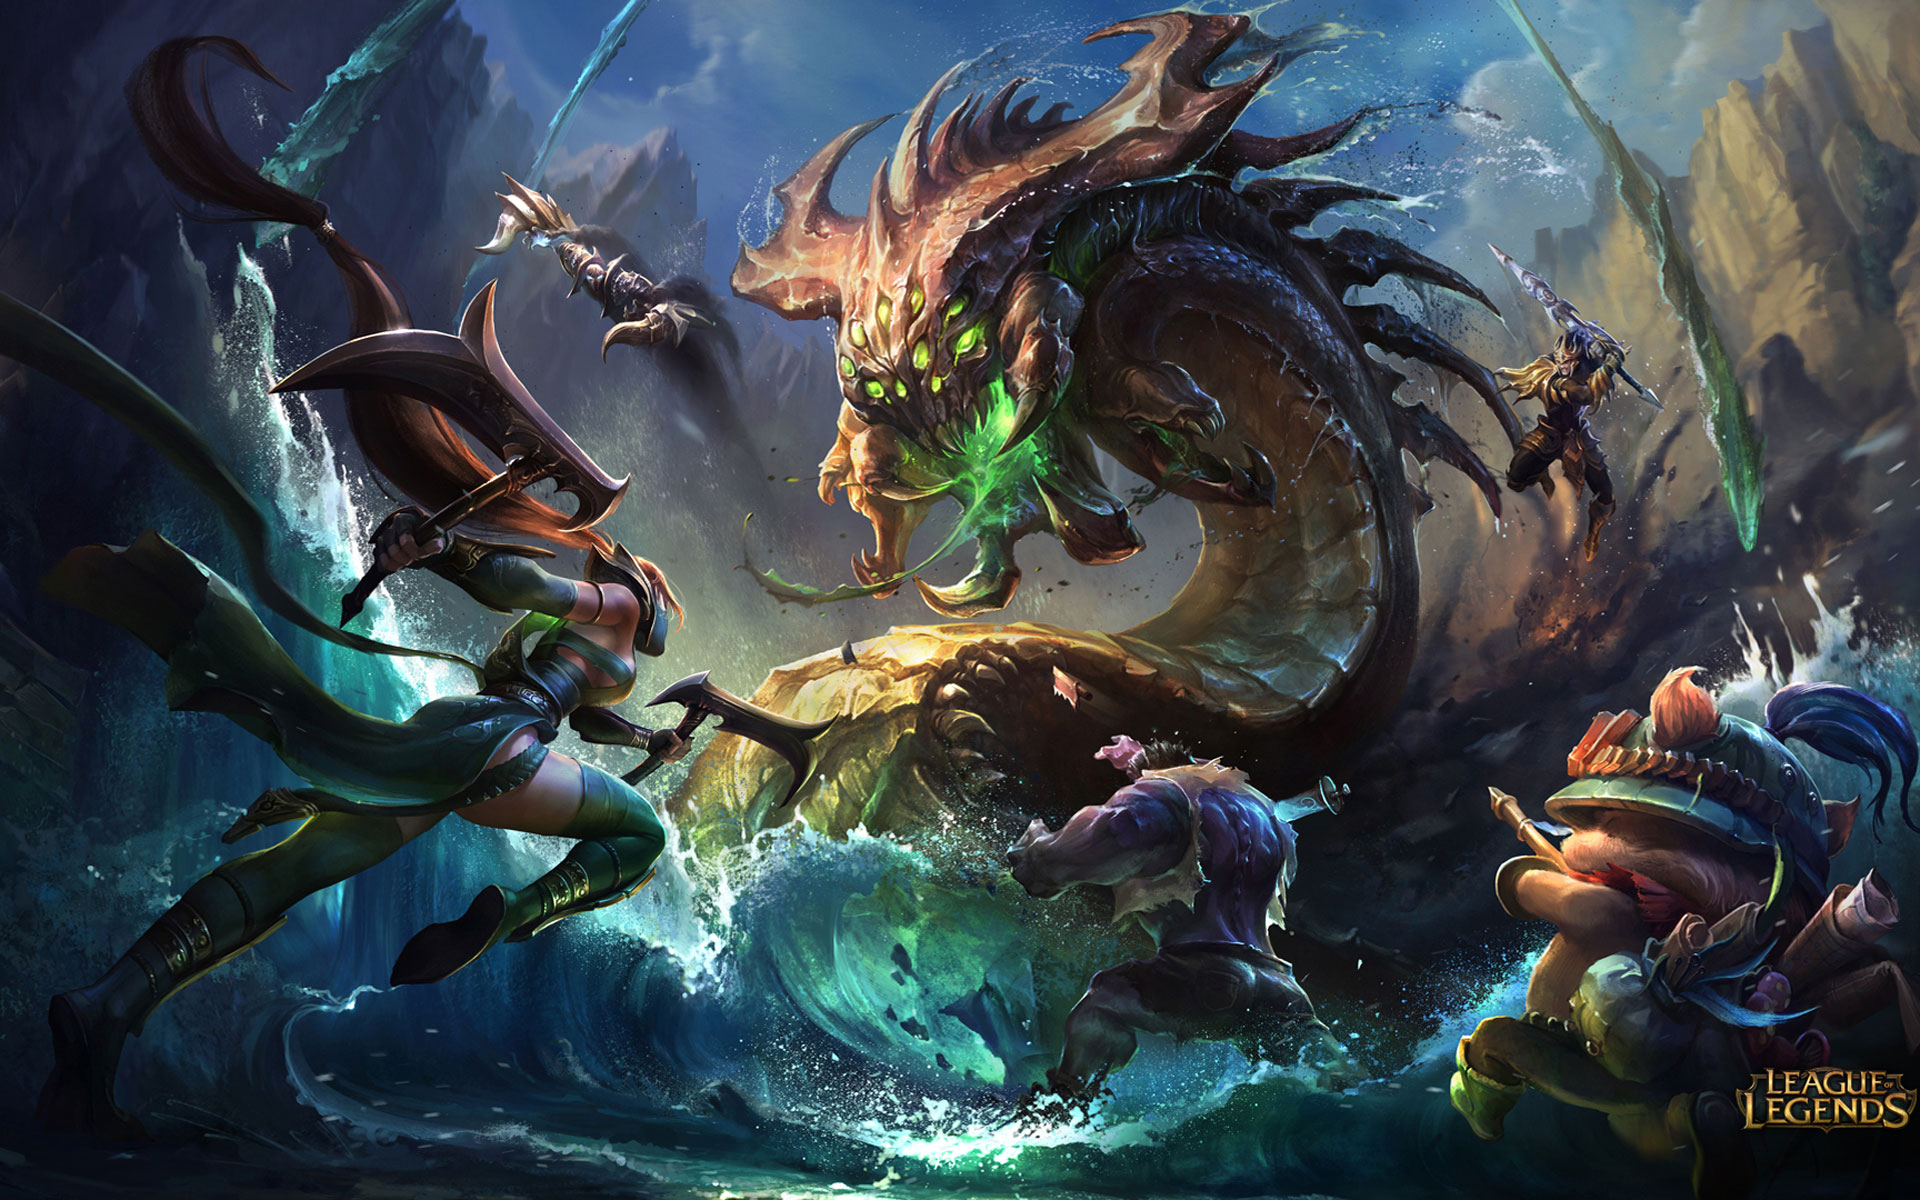 League of Legends Developer Talks About Arena Mode and Rebuilding Player Trust